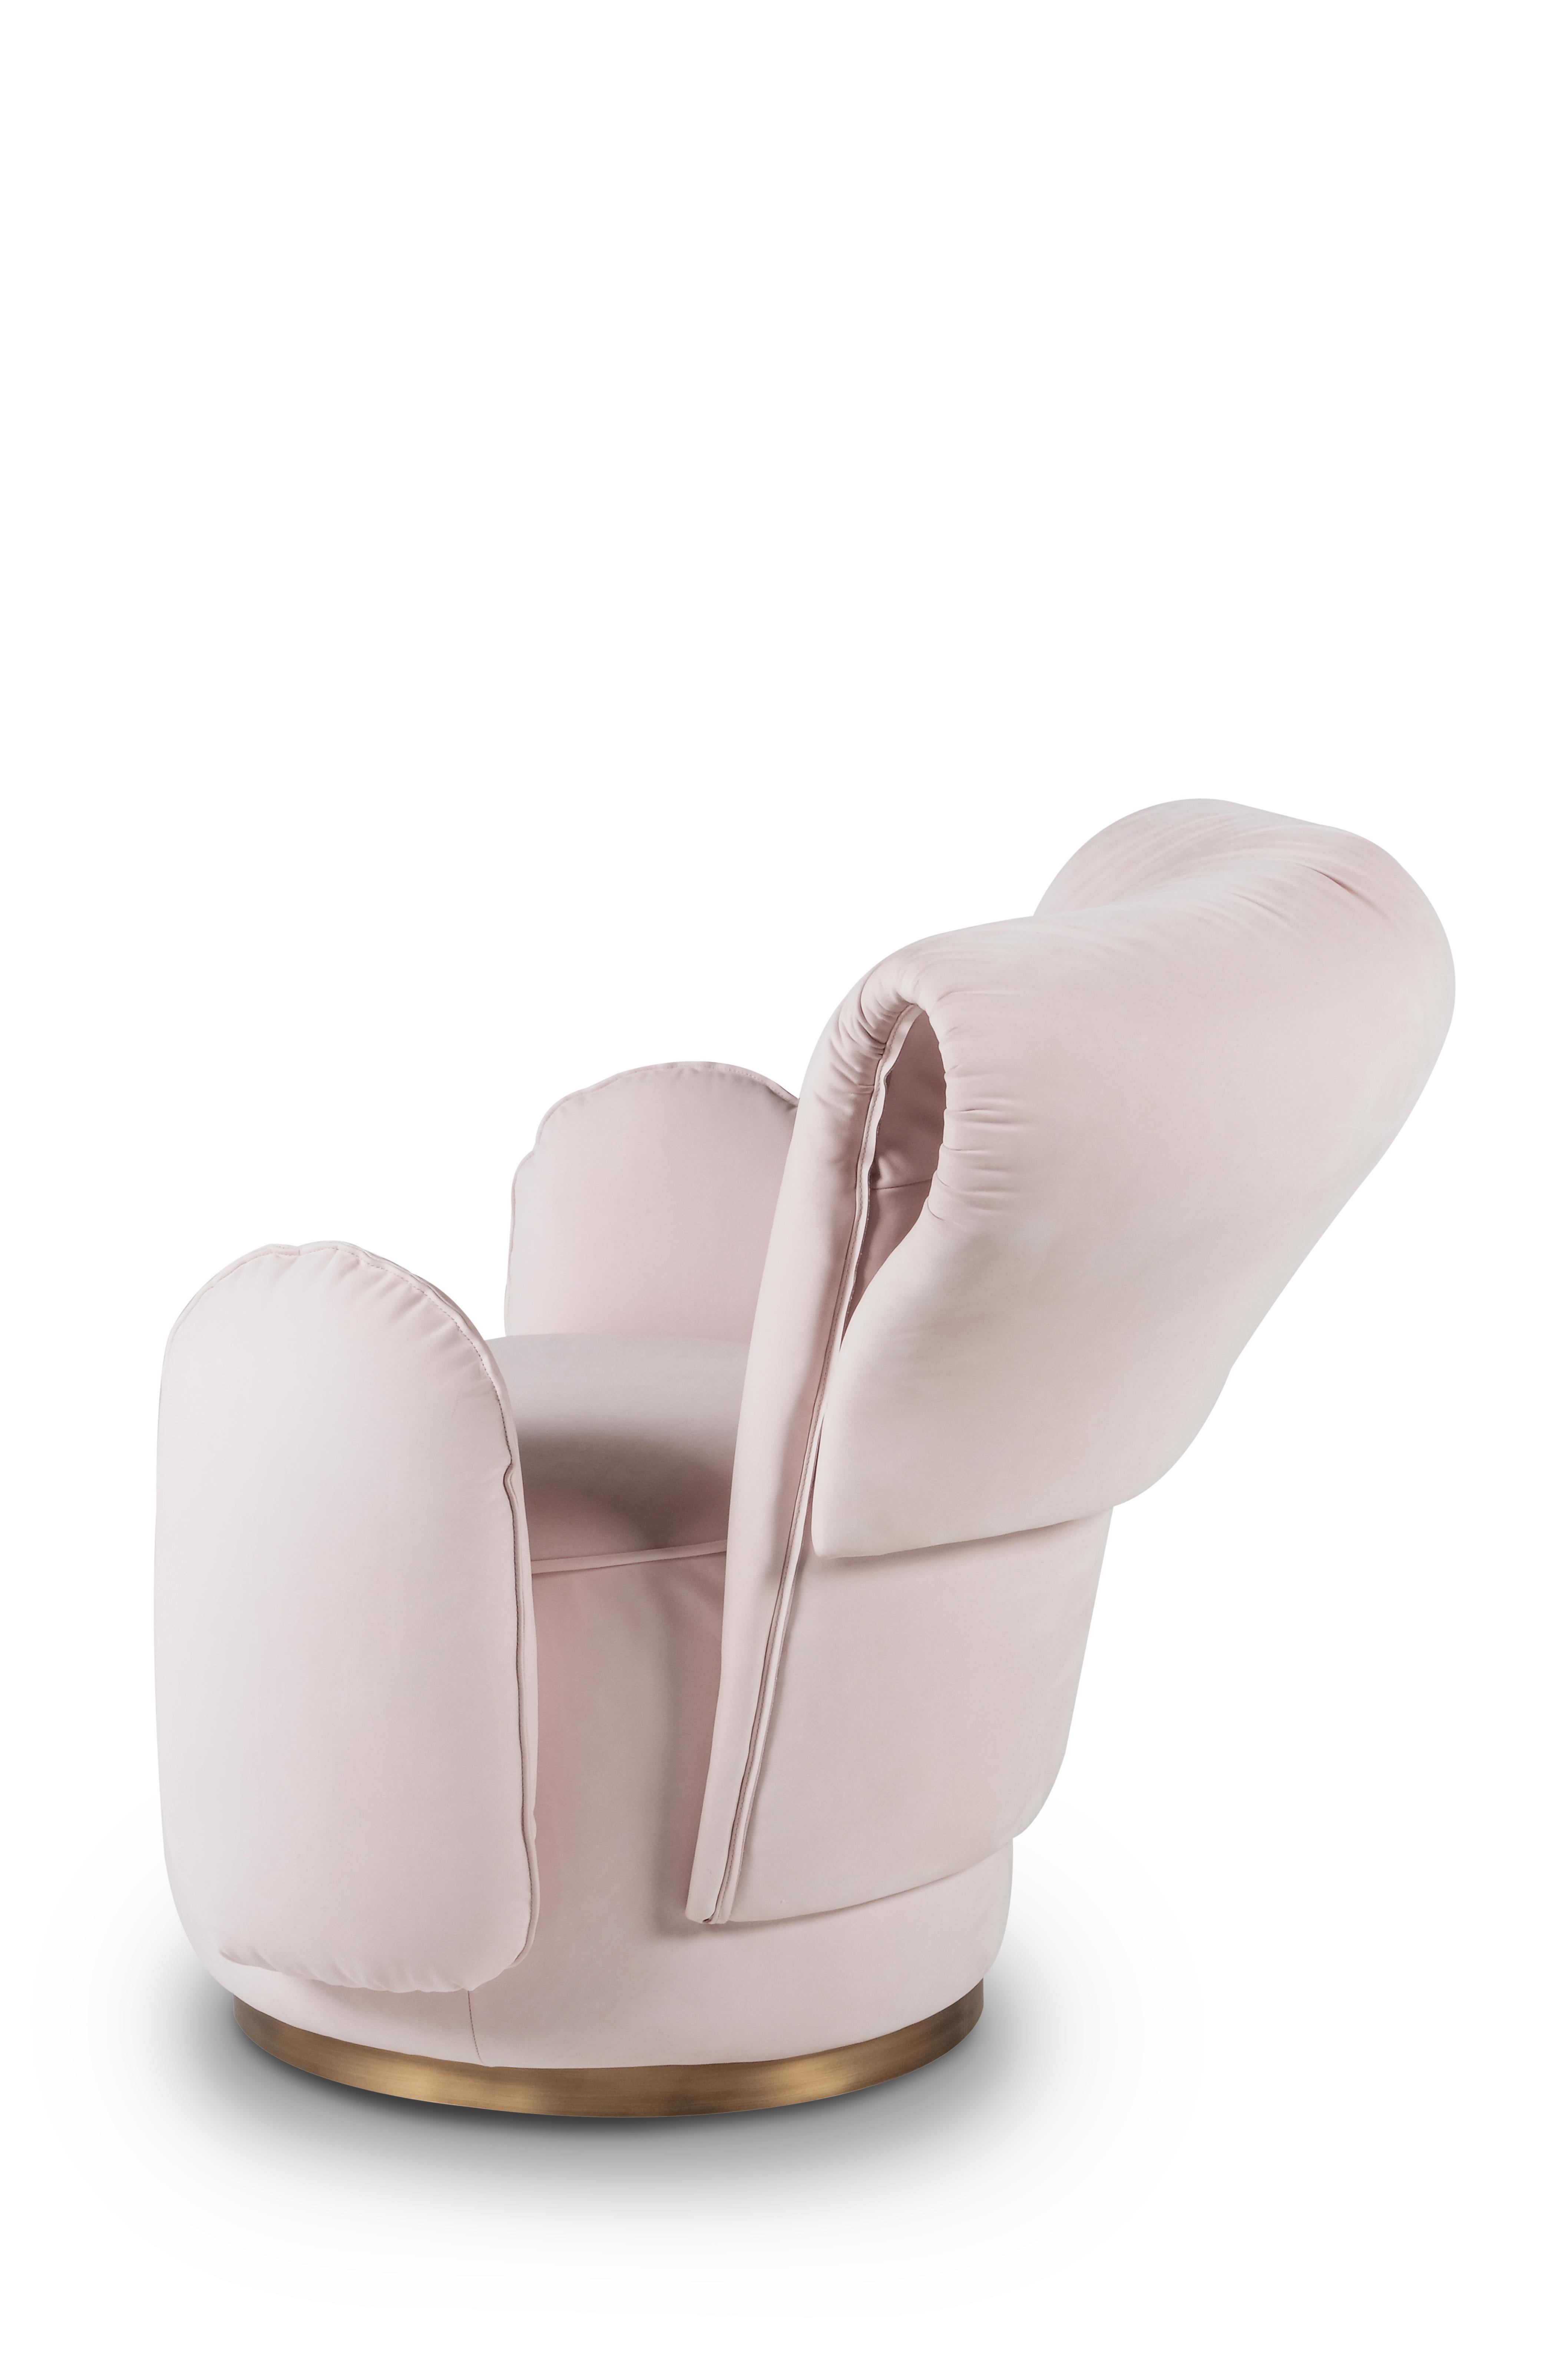 Hand-Crafted Modern Grass Armchair, Pink Nubuck Leather, Handmade in Portugal by Greenapple For Sale